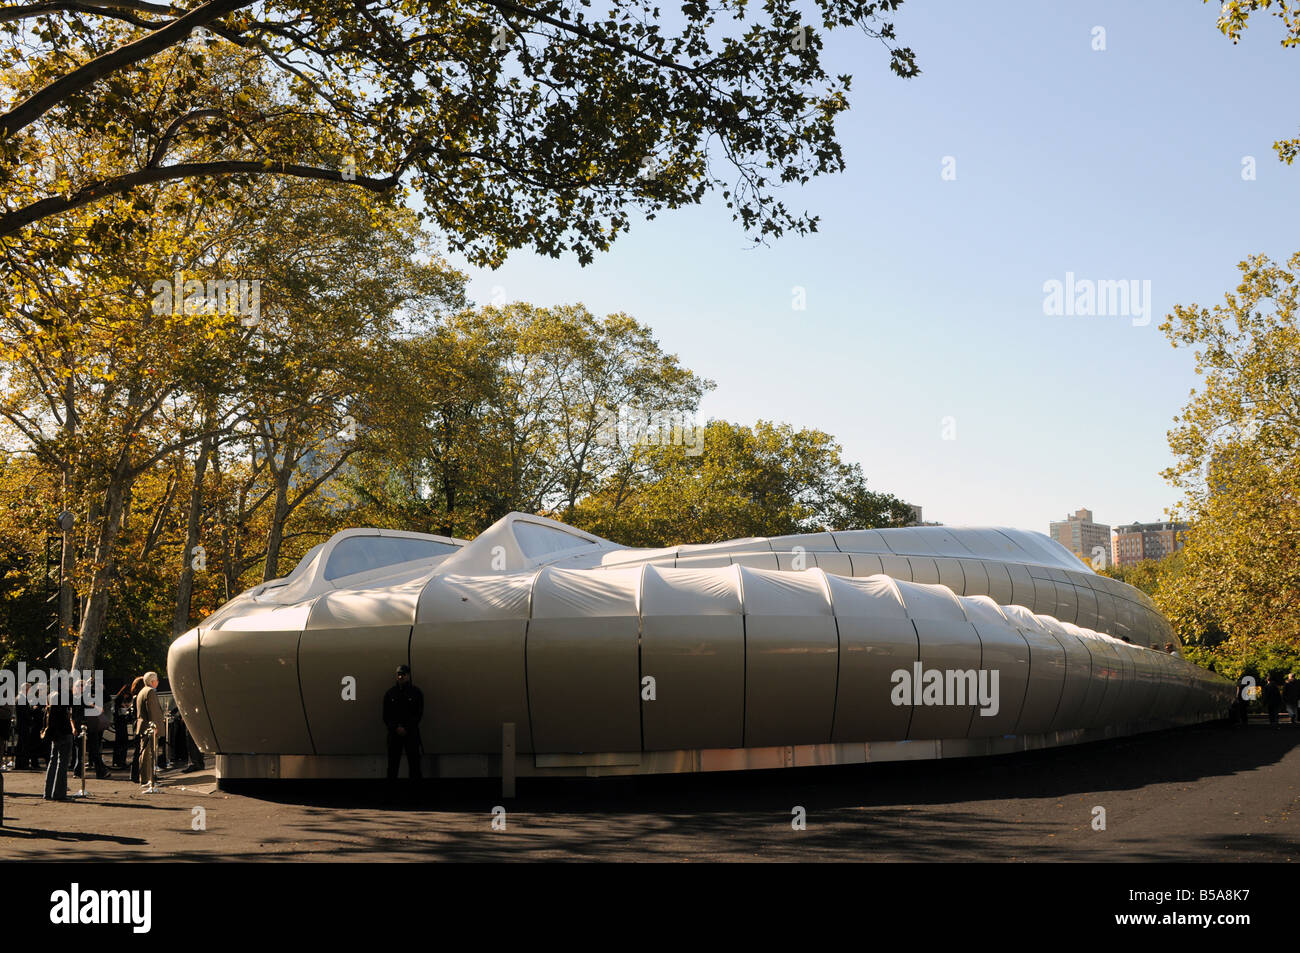 Chanel mobile in Central Park NYC design by female architect Zaha Hadid Stock Photo